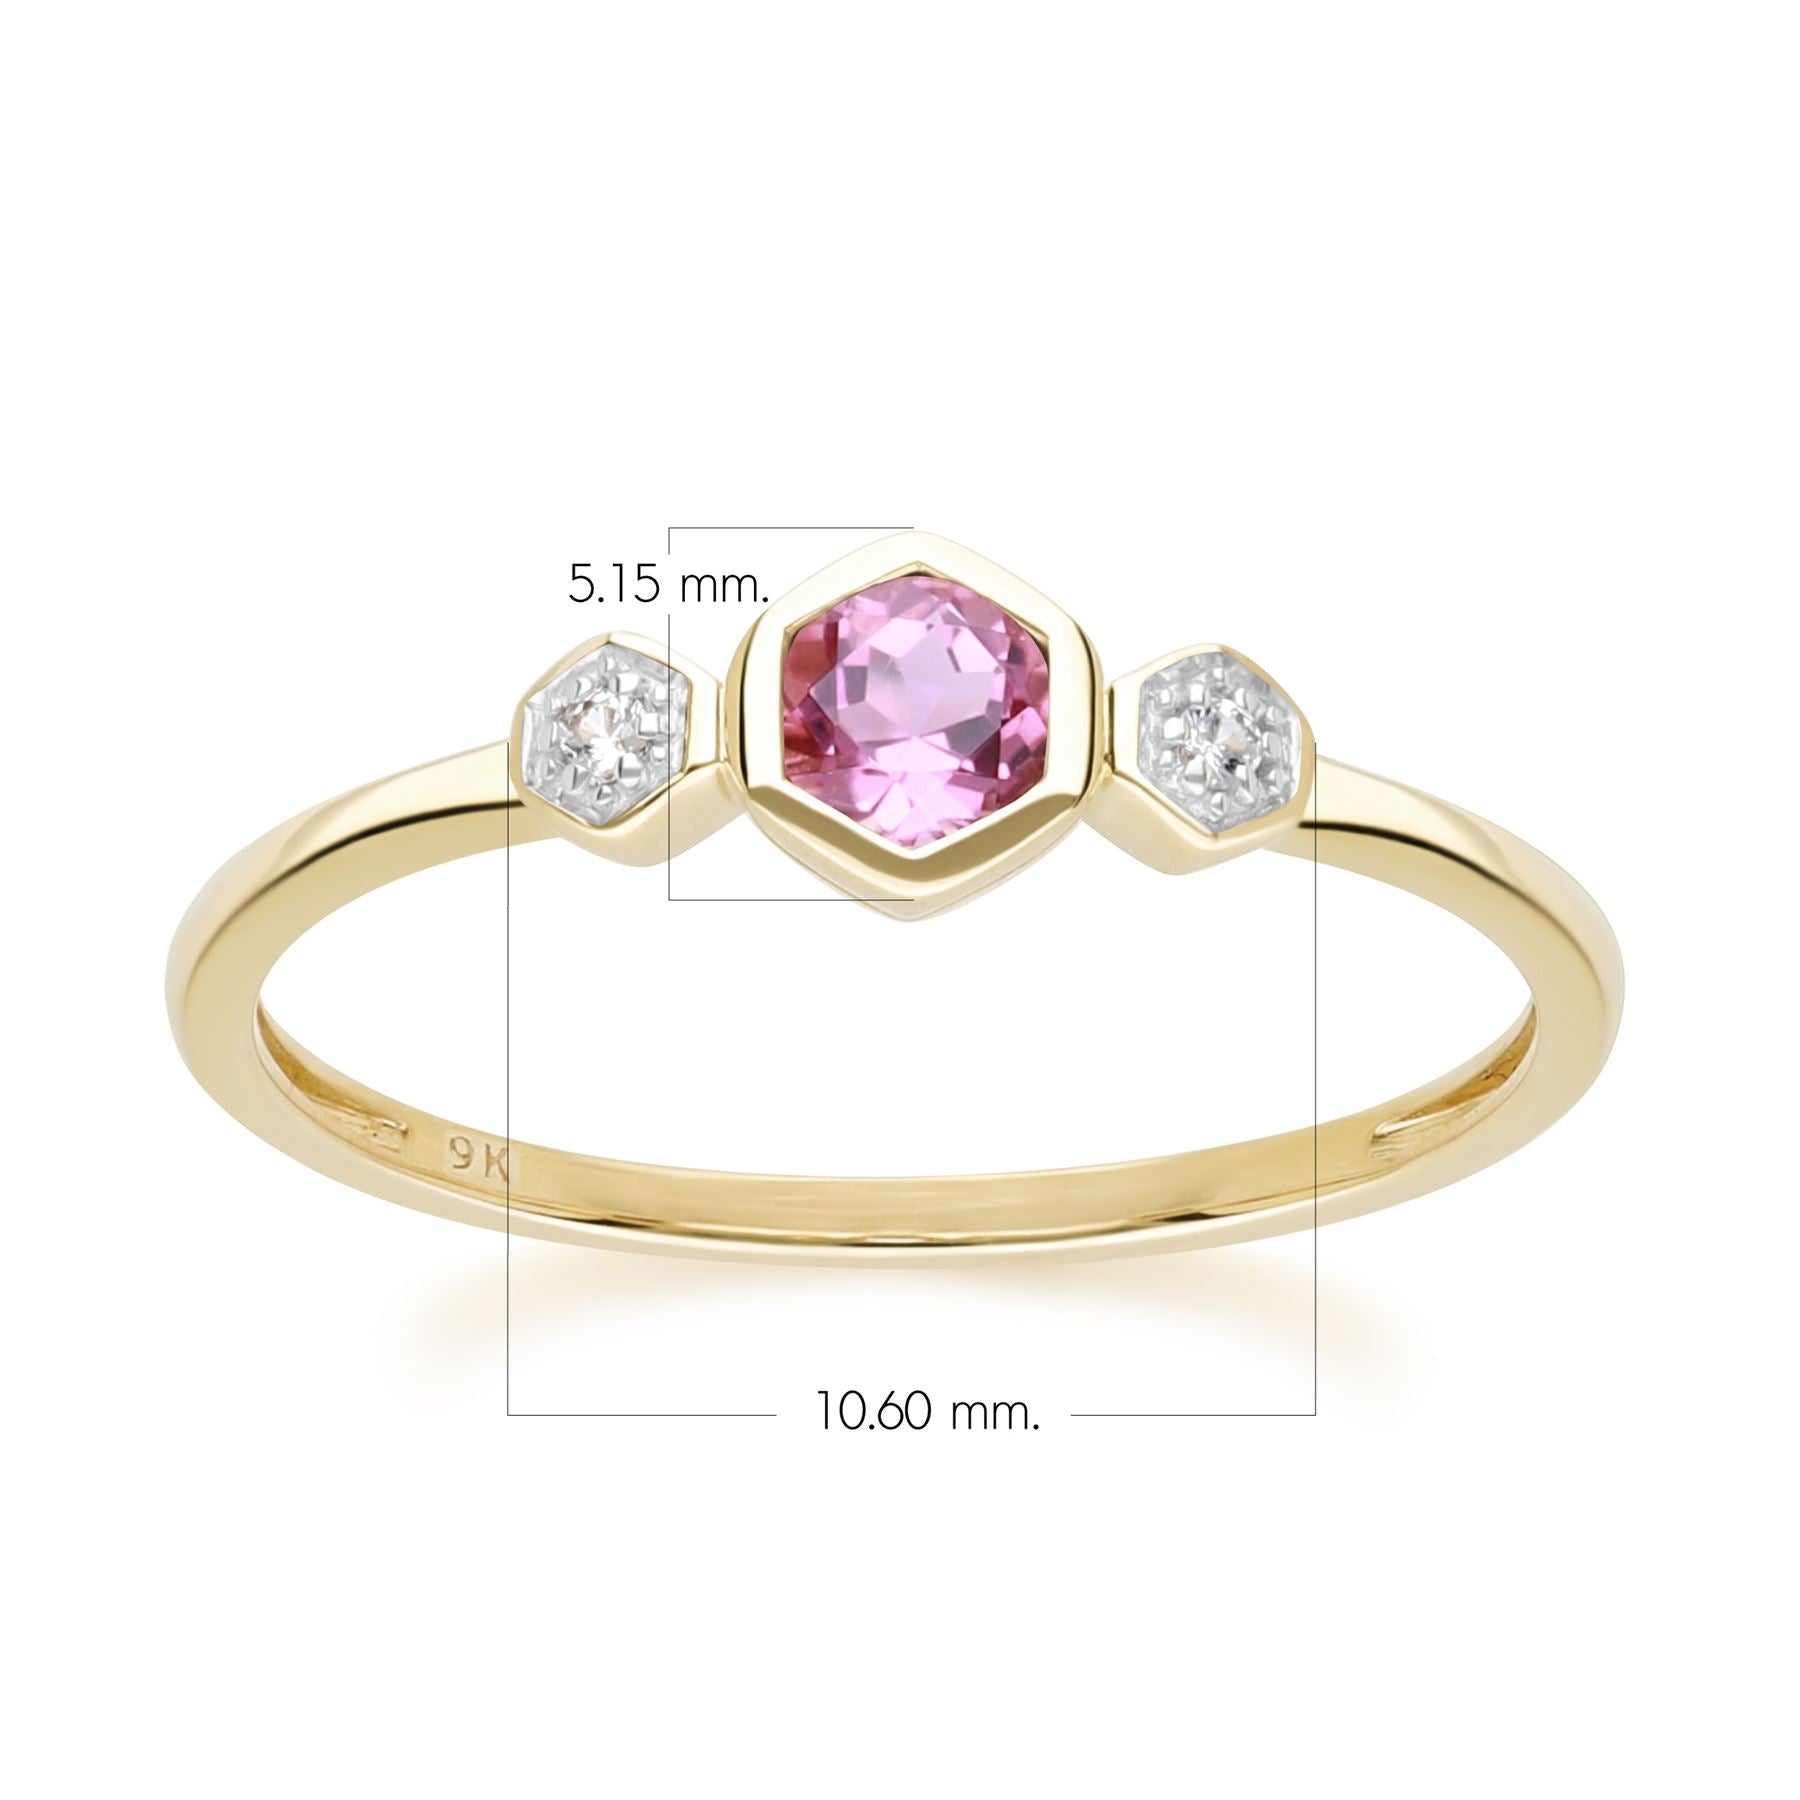 Geometric Round Pink Tourmaline and Sapphire Ring in 9ct Yellow Gold Dimensions 